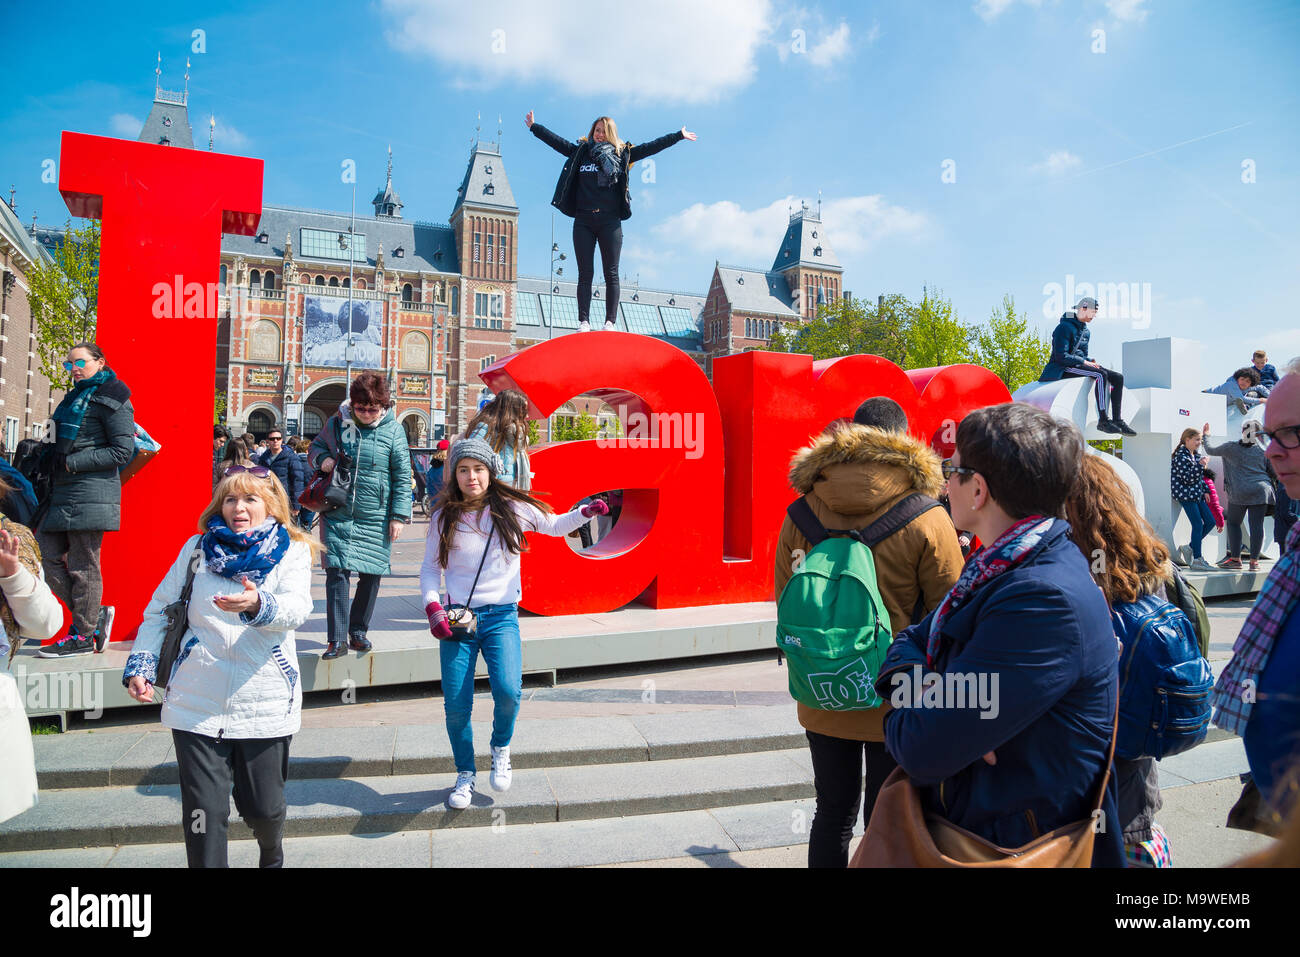 Amsterdam, Netherlands - April 20, 2017: Rijksmuseum and Statue I am Amsterdam at day, Netherlands Stock Photo